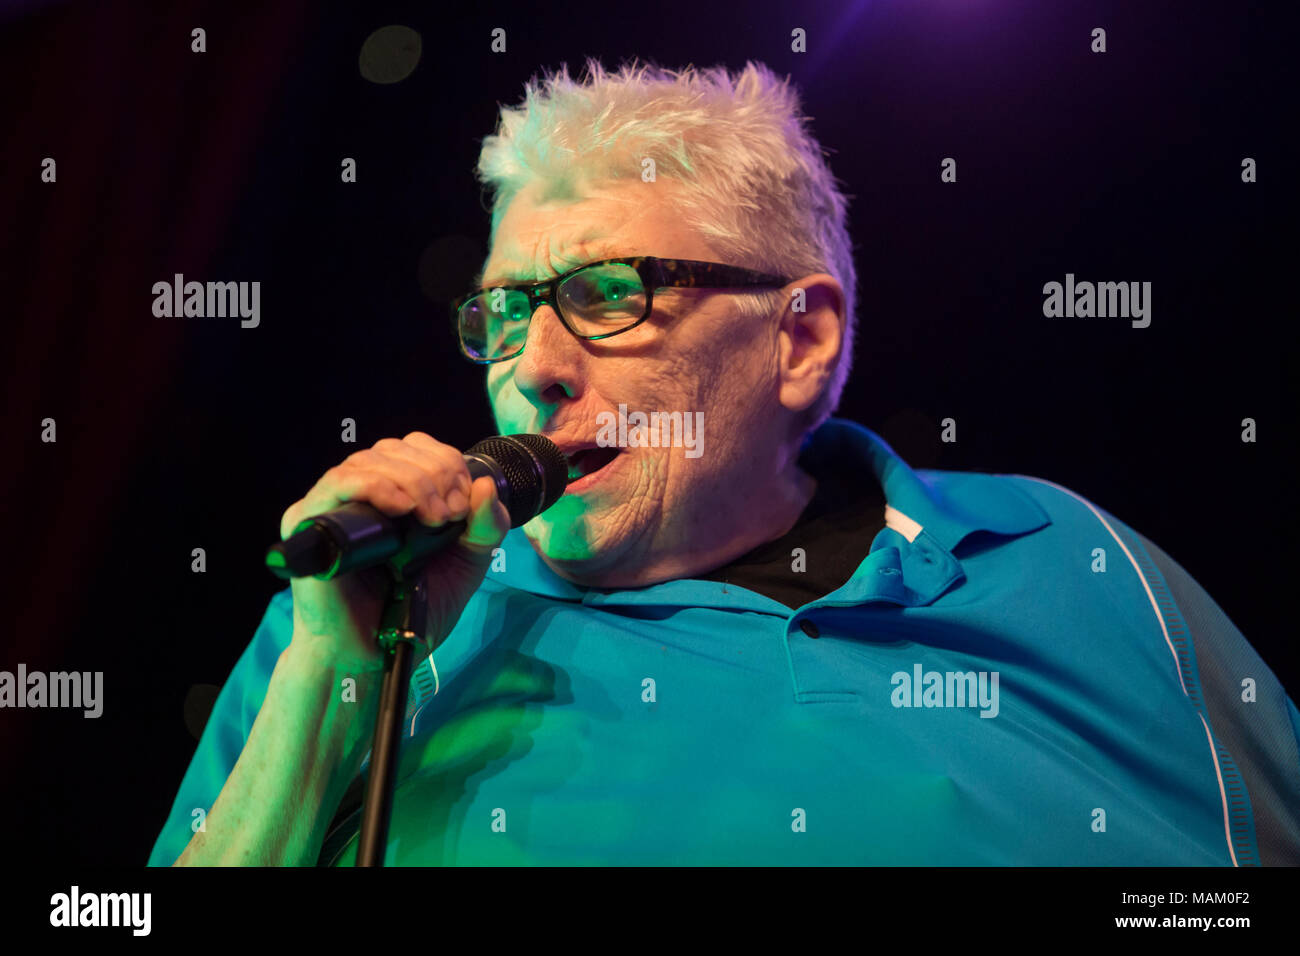 Nantwich, Cheshire, UK. 2nd April, 2018. Chris Farlowe performs live at the Nantwich Civic Hall as part of the Oh Boy It's the non-stop Sixties show during the 22nd Nantwich Jazz, Blues and Music Festival. Credit: Simon Newbury/Alamy Live News Stock Photo